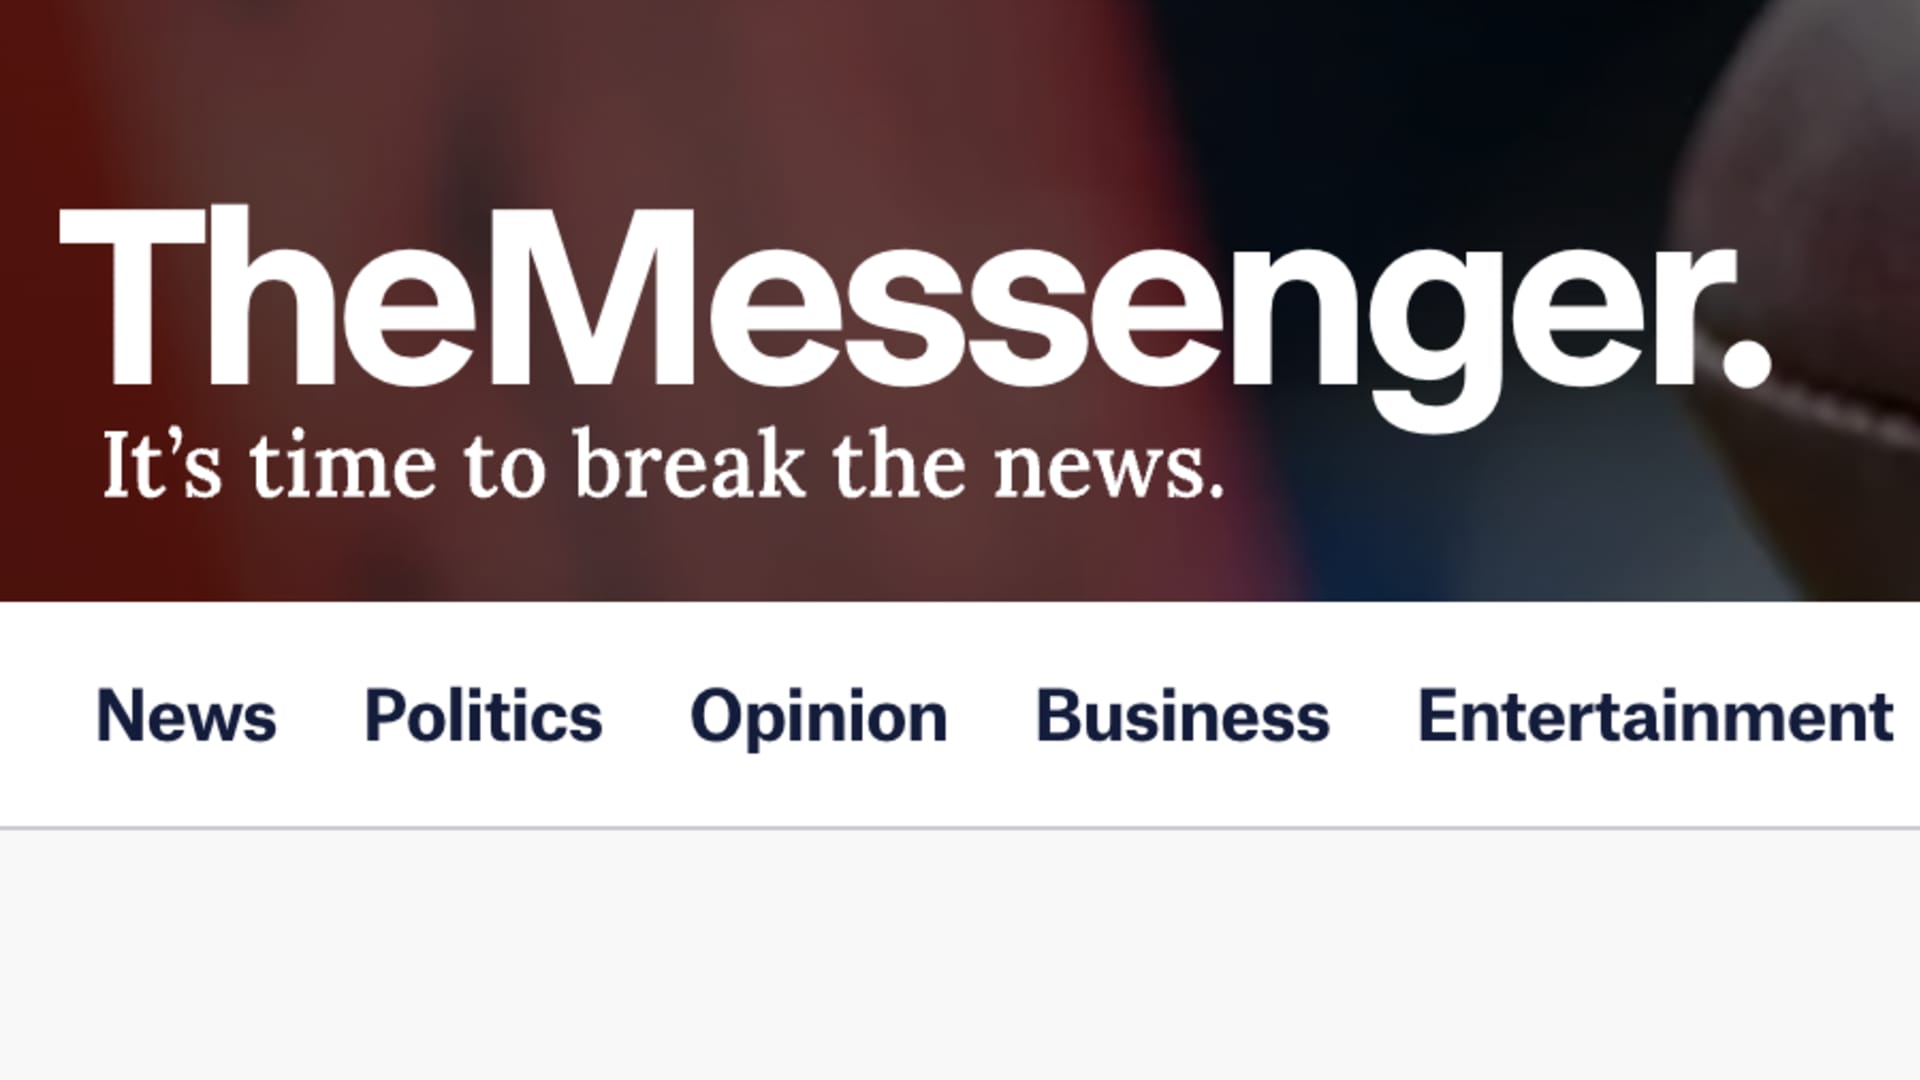 The Messenger is counting on a sudden and dramatic advertising turnaround to survive